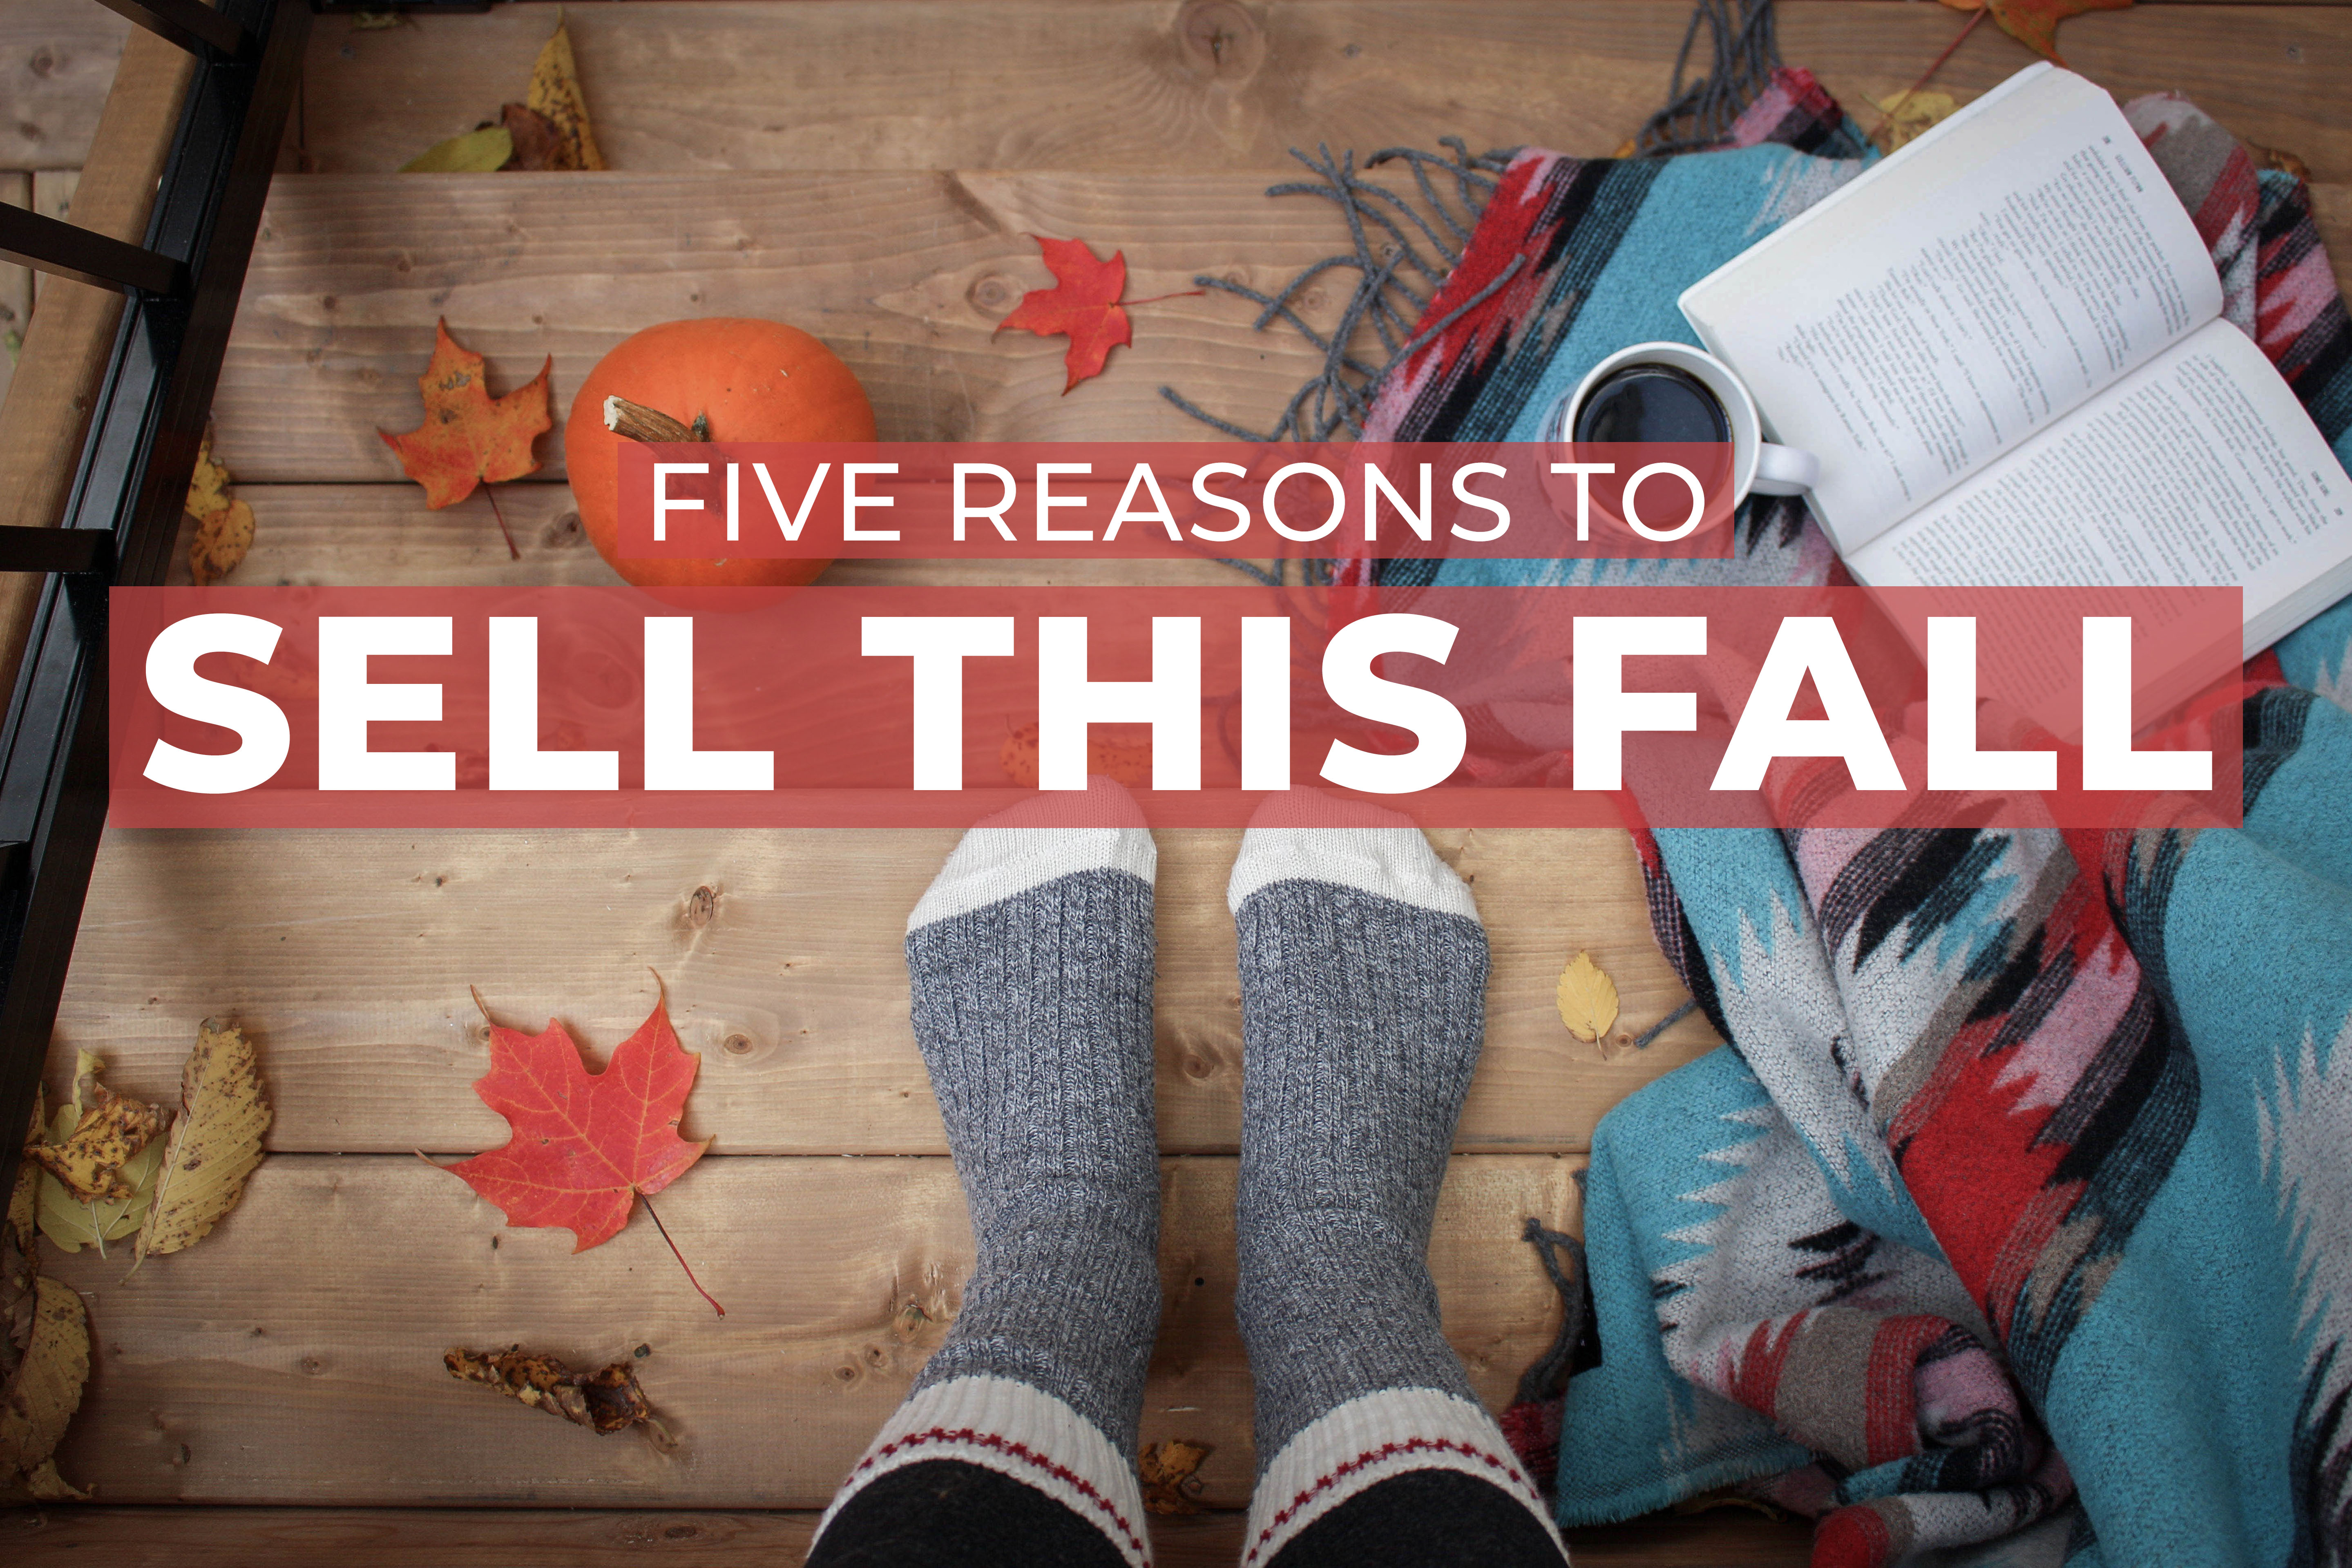 5 Reasons to Sell This Fall